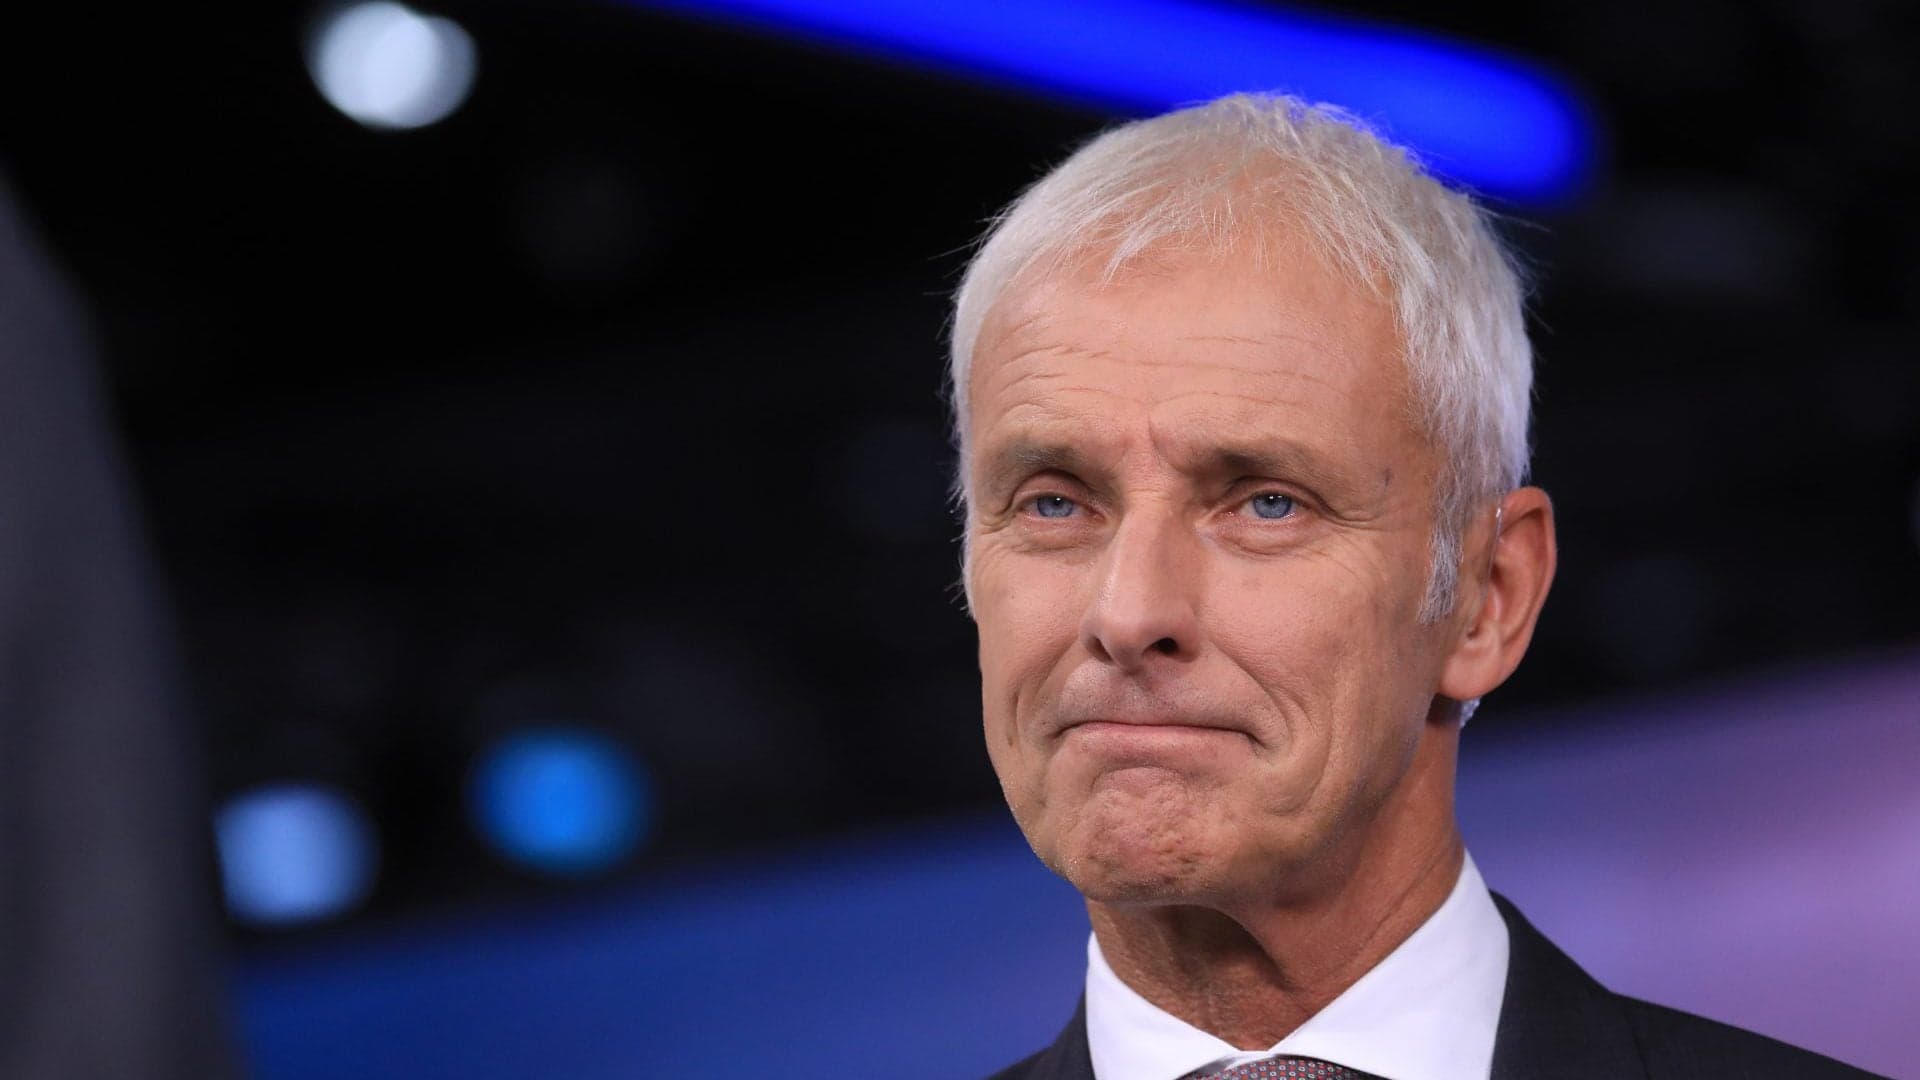 VW CEO Slams Tesla for Only Selling 80,000 Cars a Year, Losing Millions